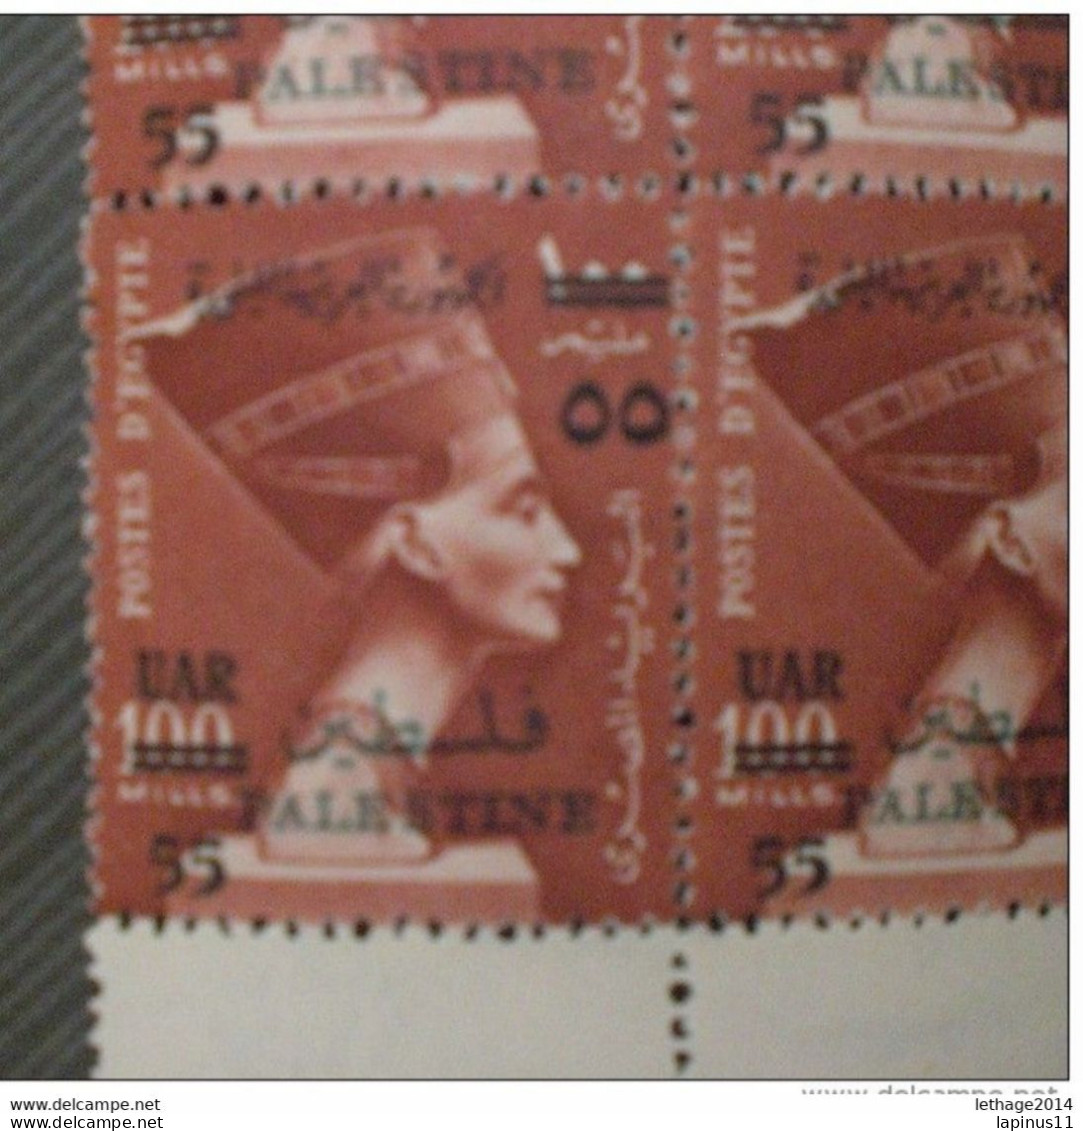 EGITTO EGYPT EGYPTE PALESTINE 1959 Queen Nefertiti UAR Postage Stamps Overprinted "PALESTINE" In English And Arabic MNH - Unused Stamps